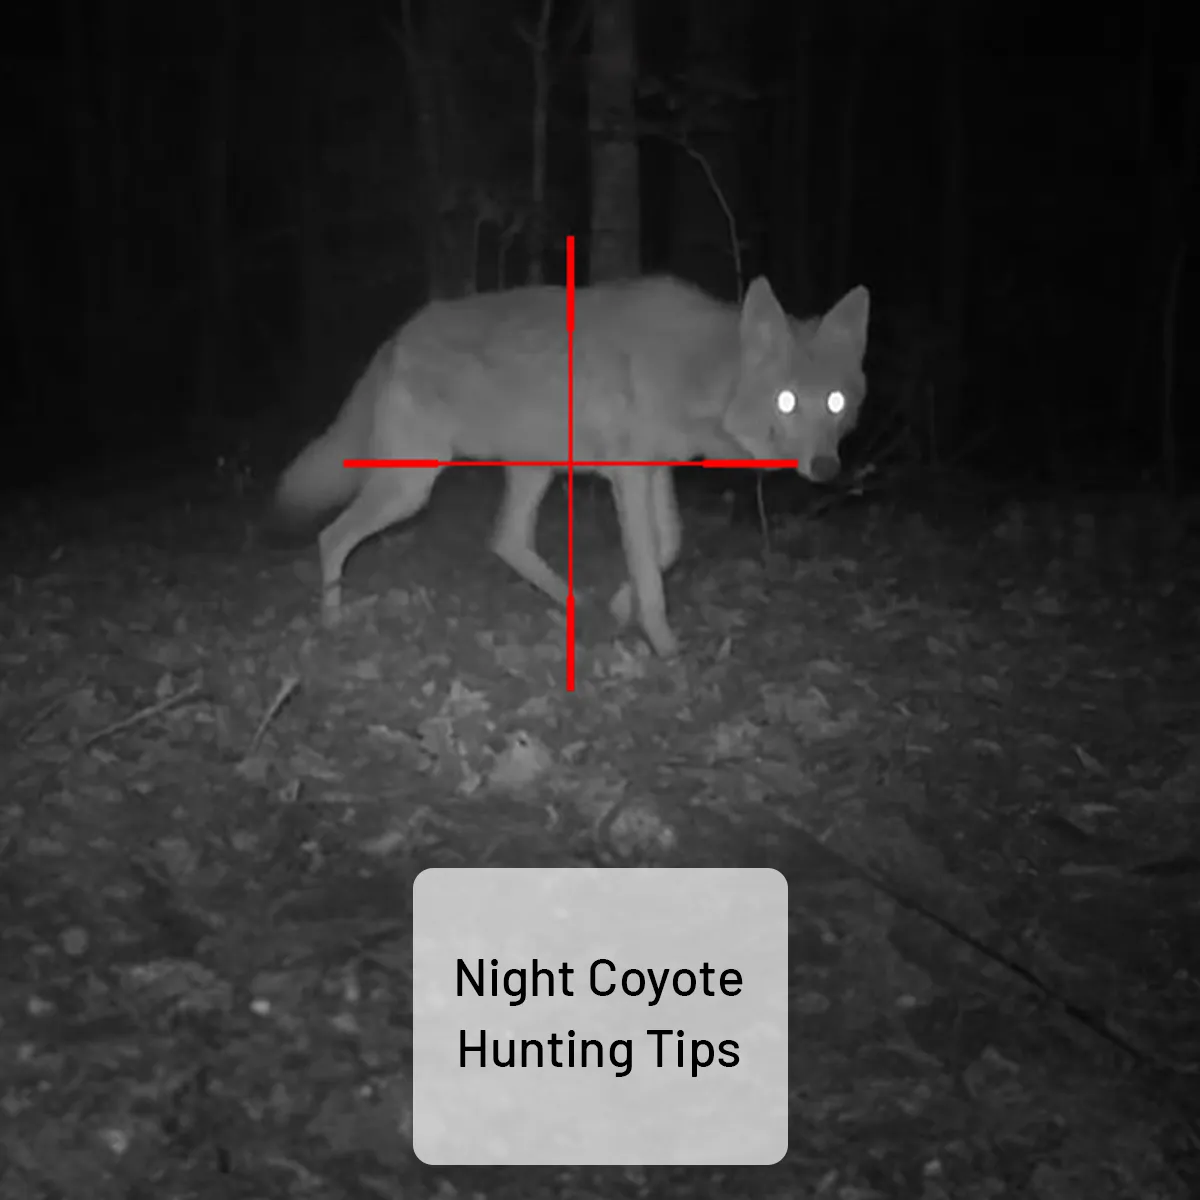 Coyote Night Hunting Tips